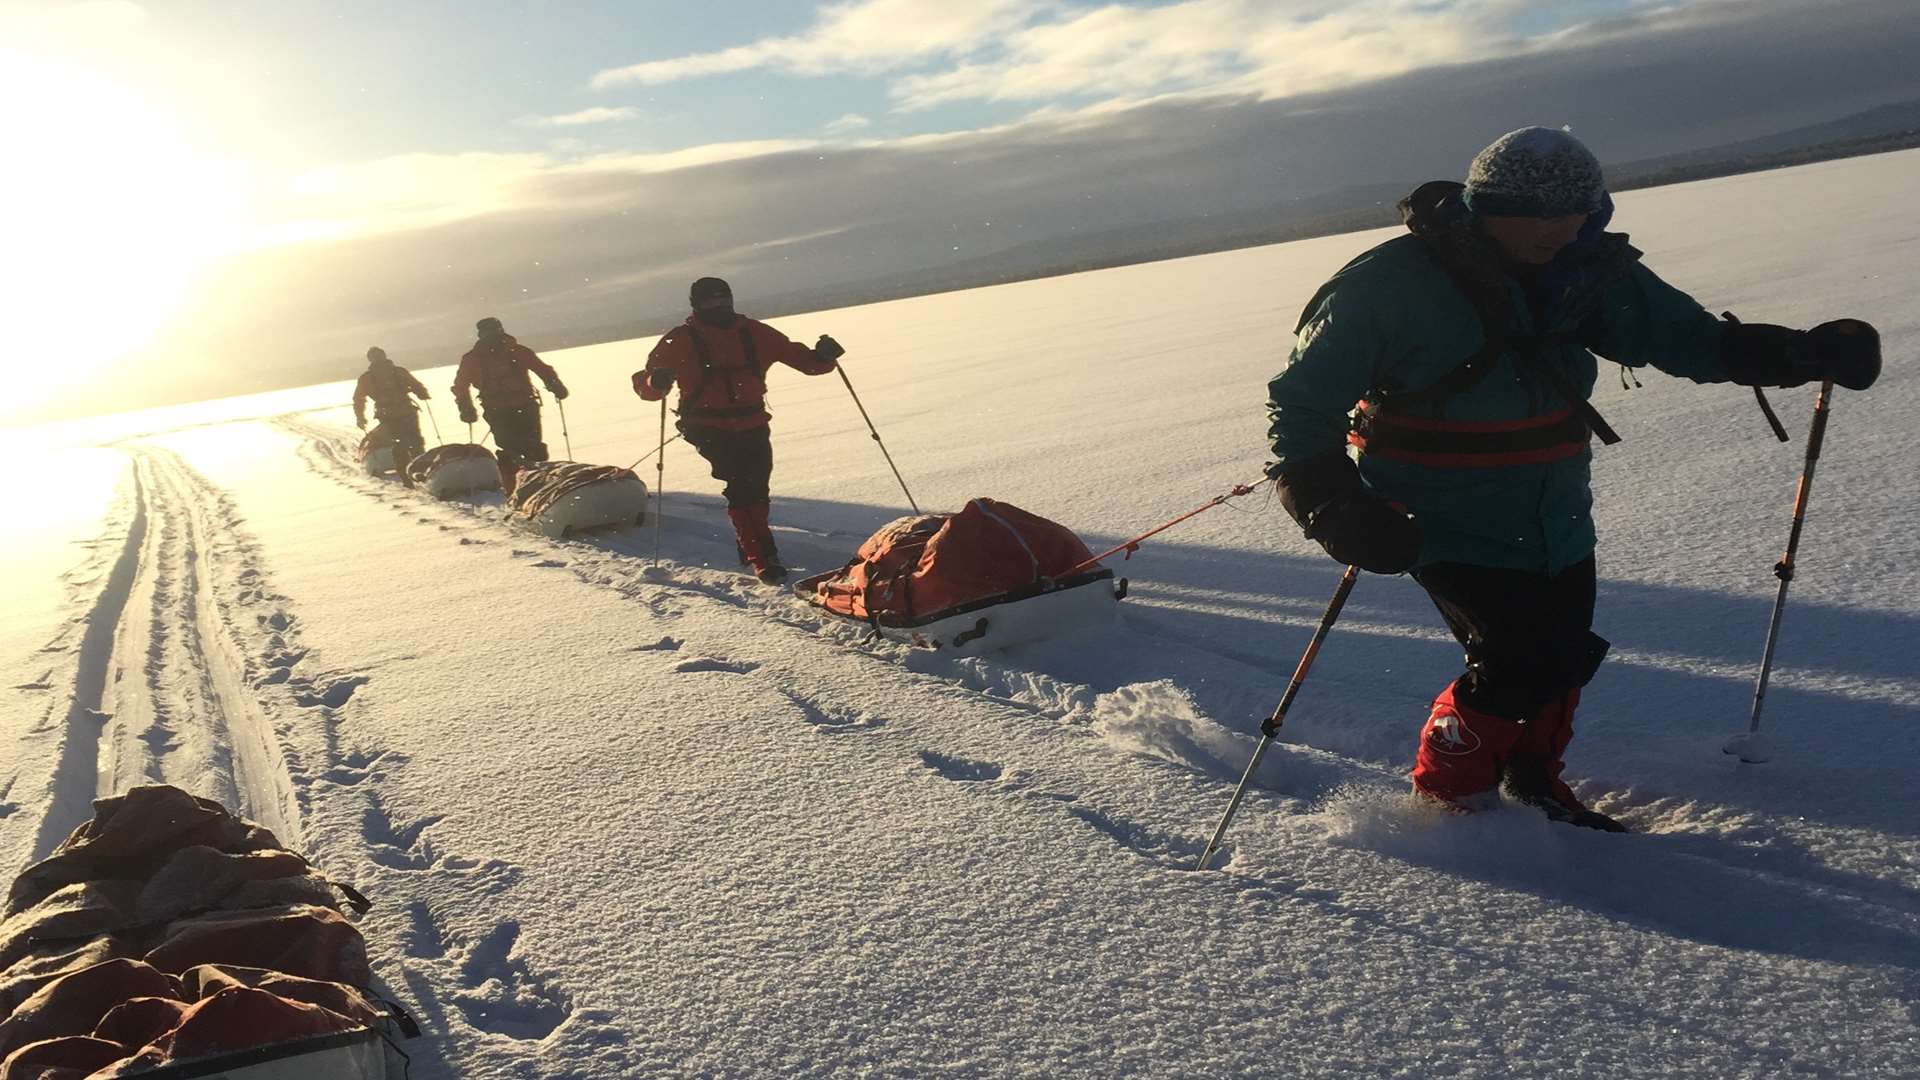 The Spear17 team training in Norway